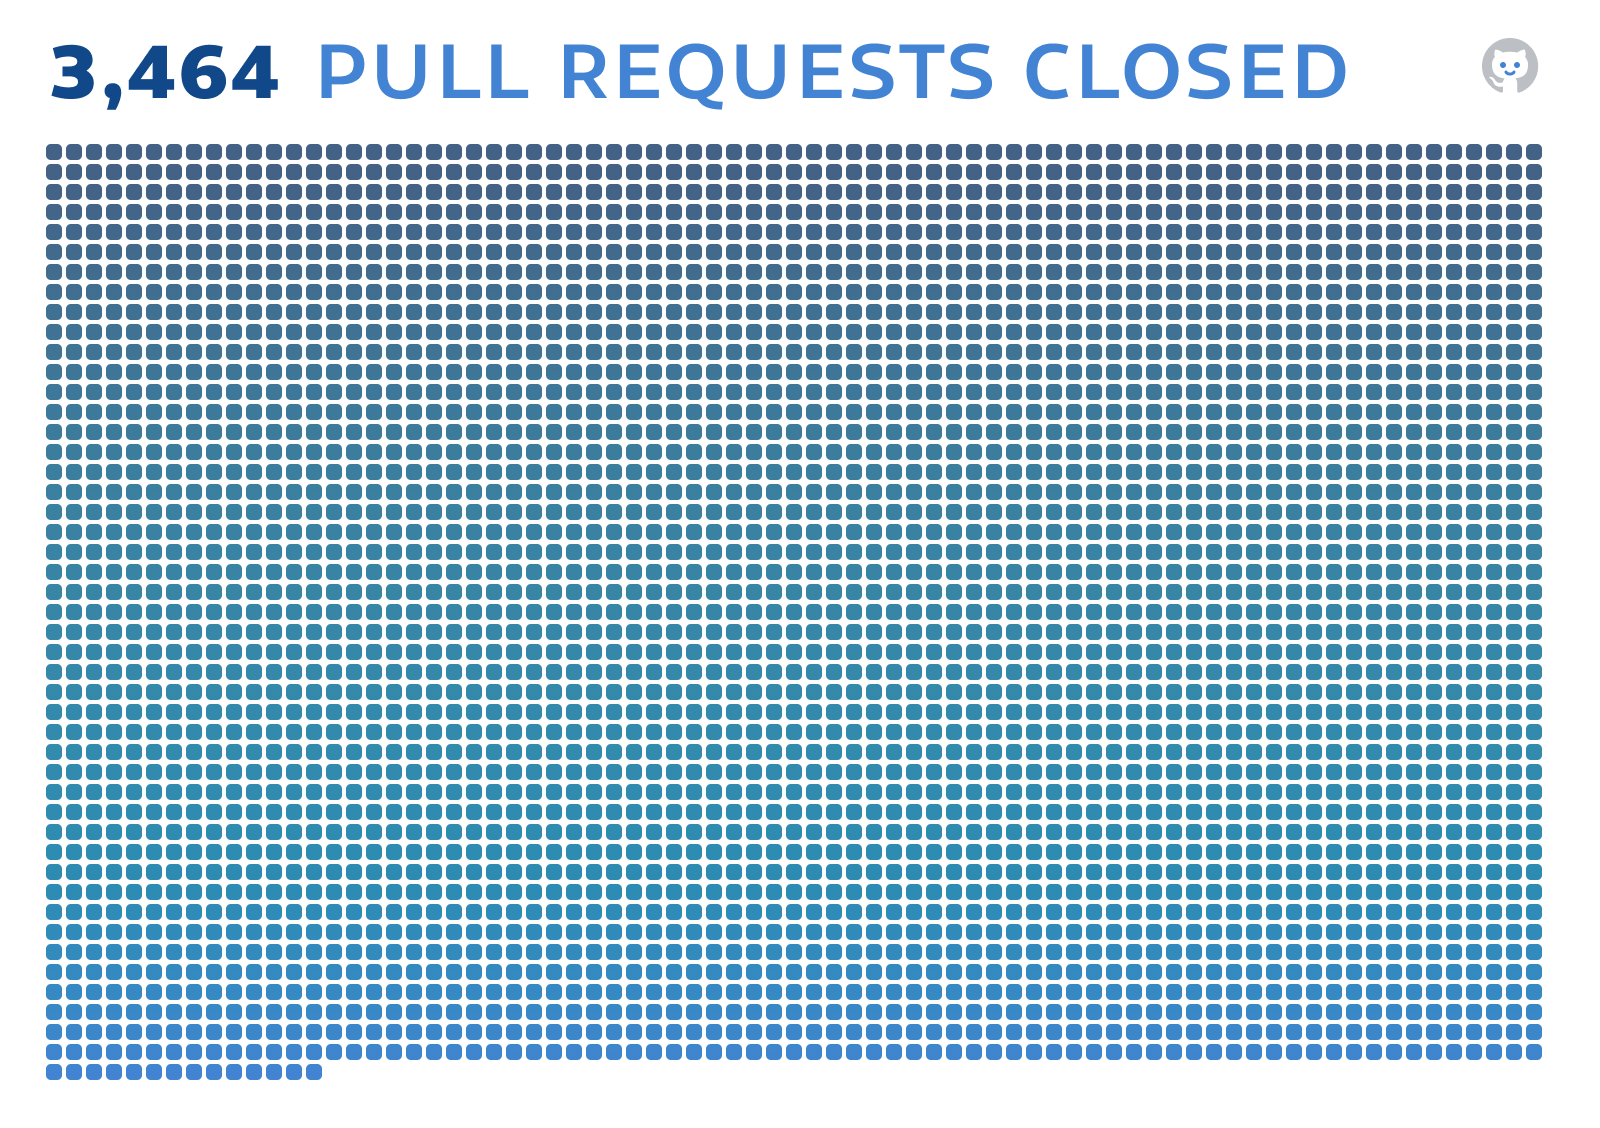 Pull Requests Closed: 3464